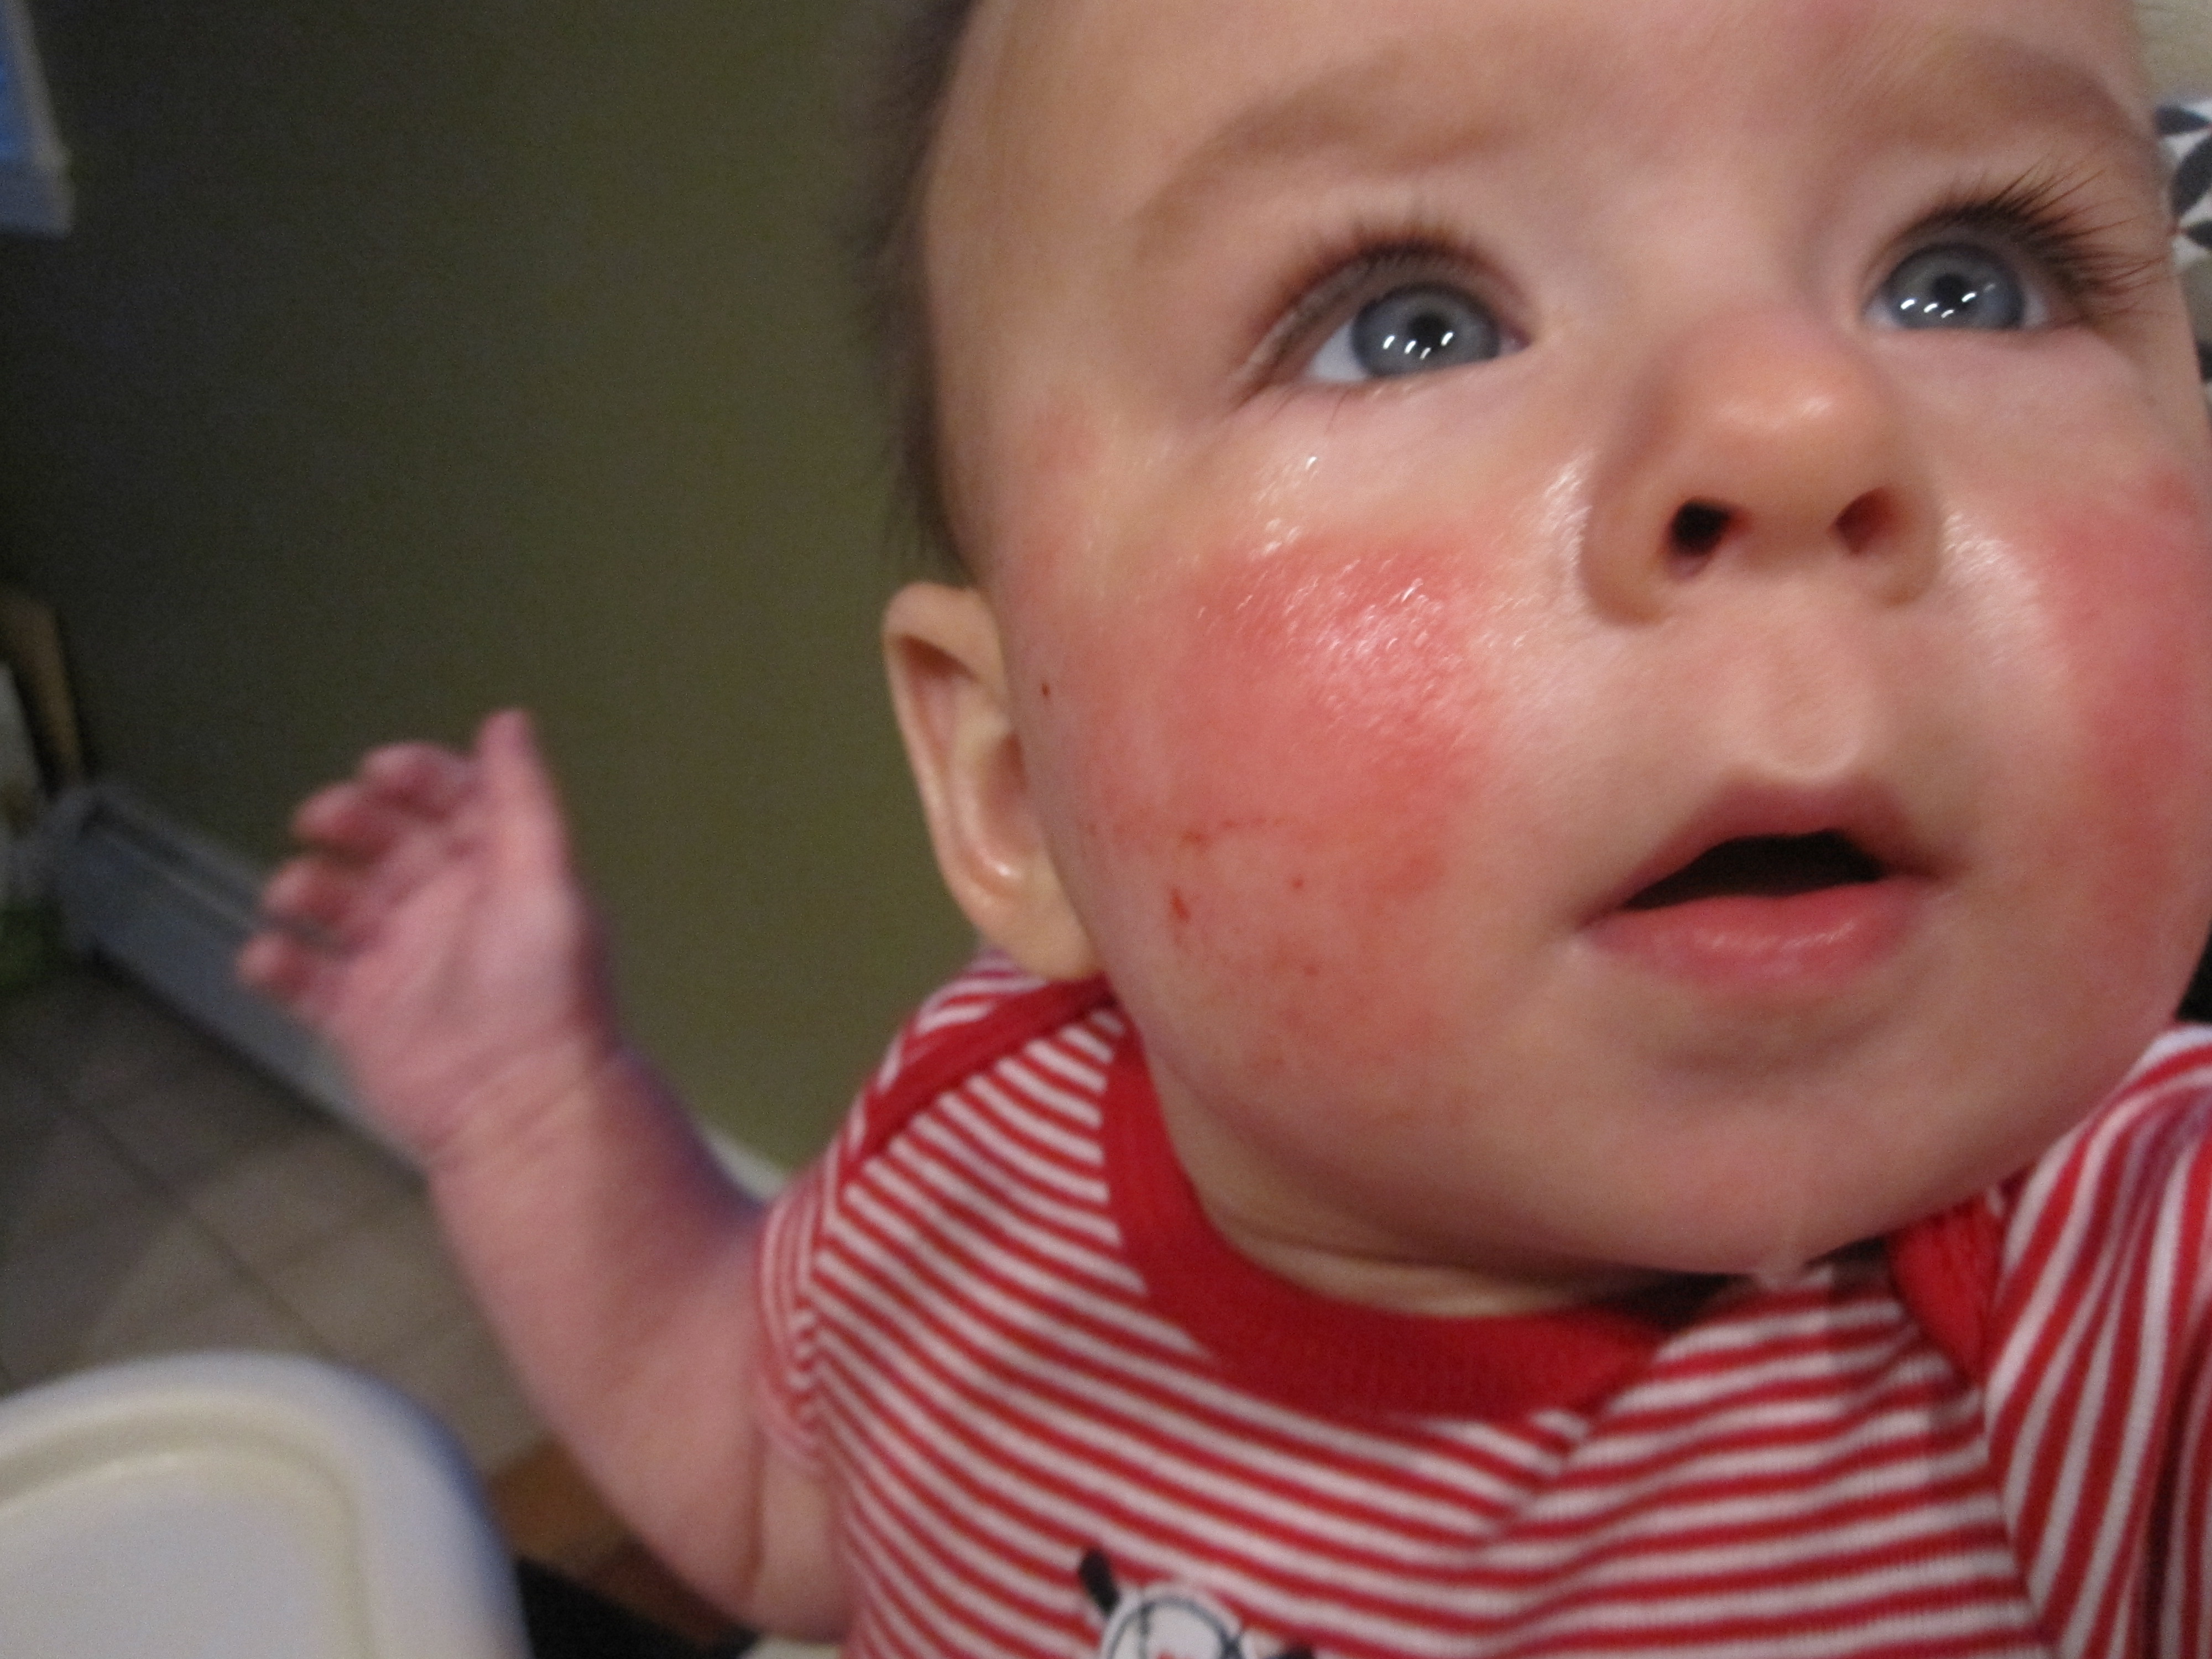 Guide to Rashes | Parenting